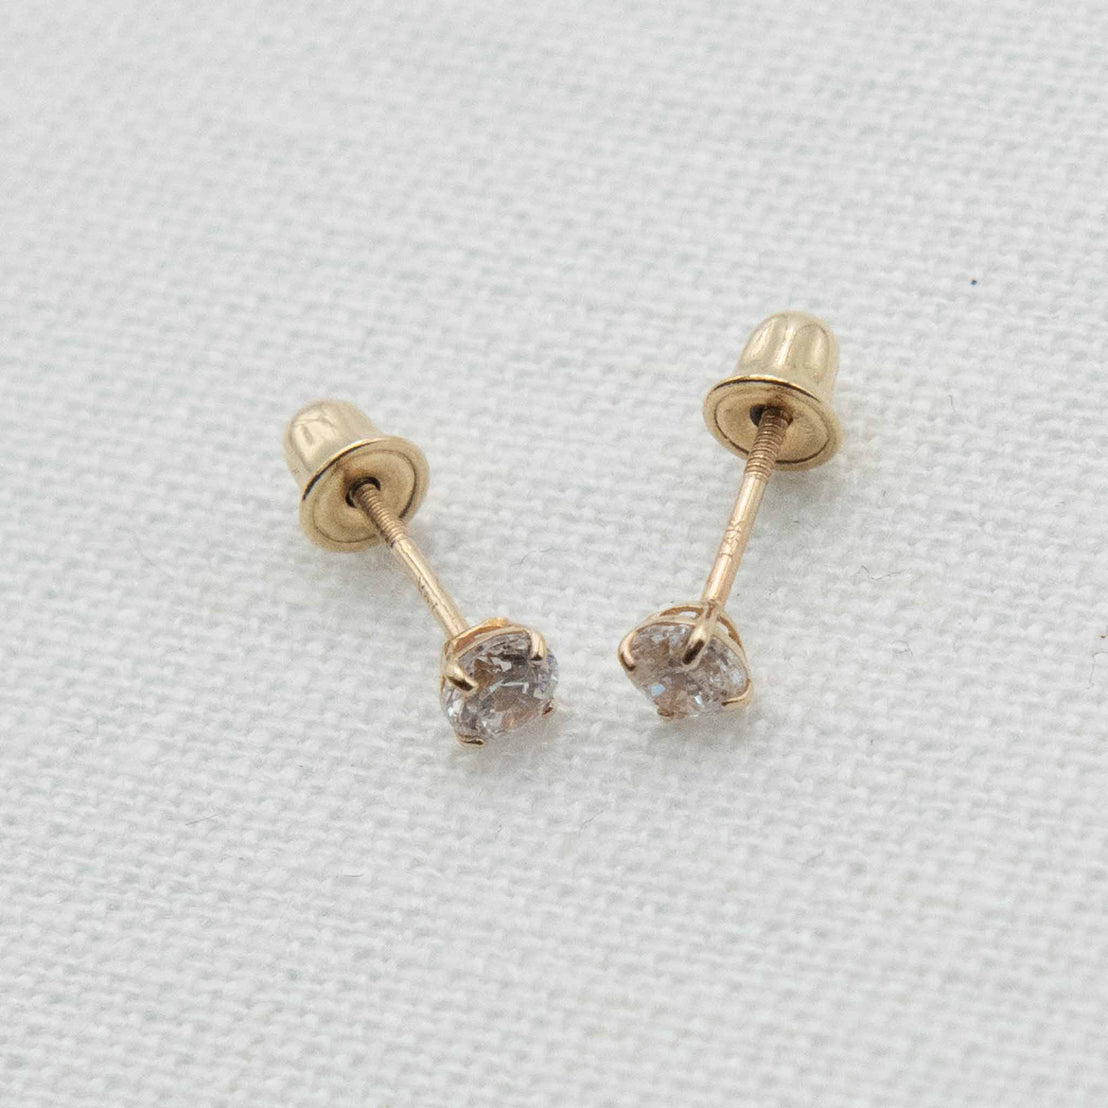 Gold stud earrings with screw on backs